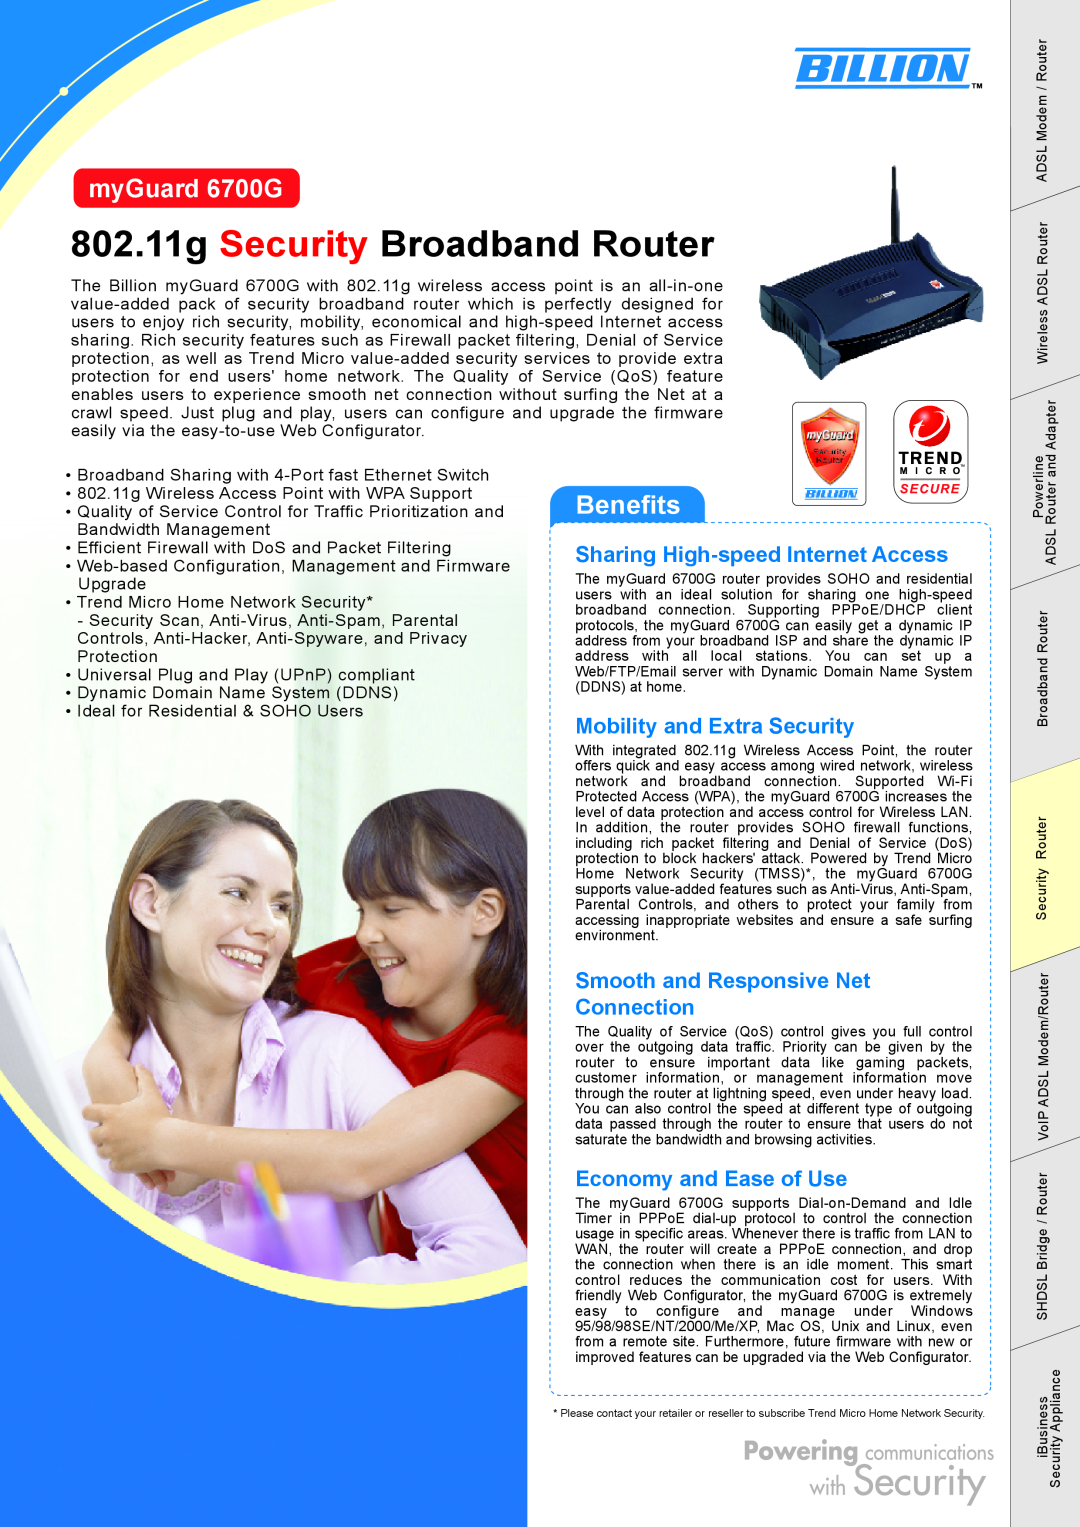 Billion Electric Company manual 802.11g Security Broadband Router, myGuard 6700G, Benefits, Mobility and Extra Security 